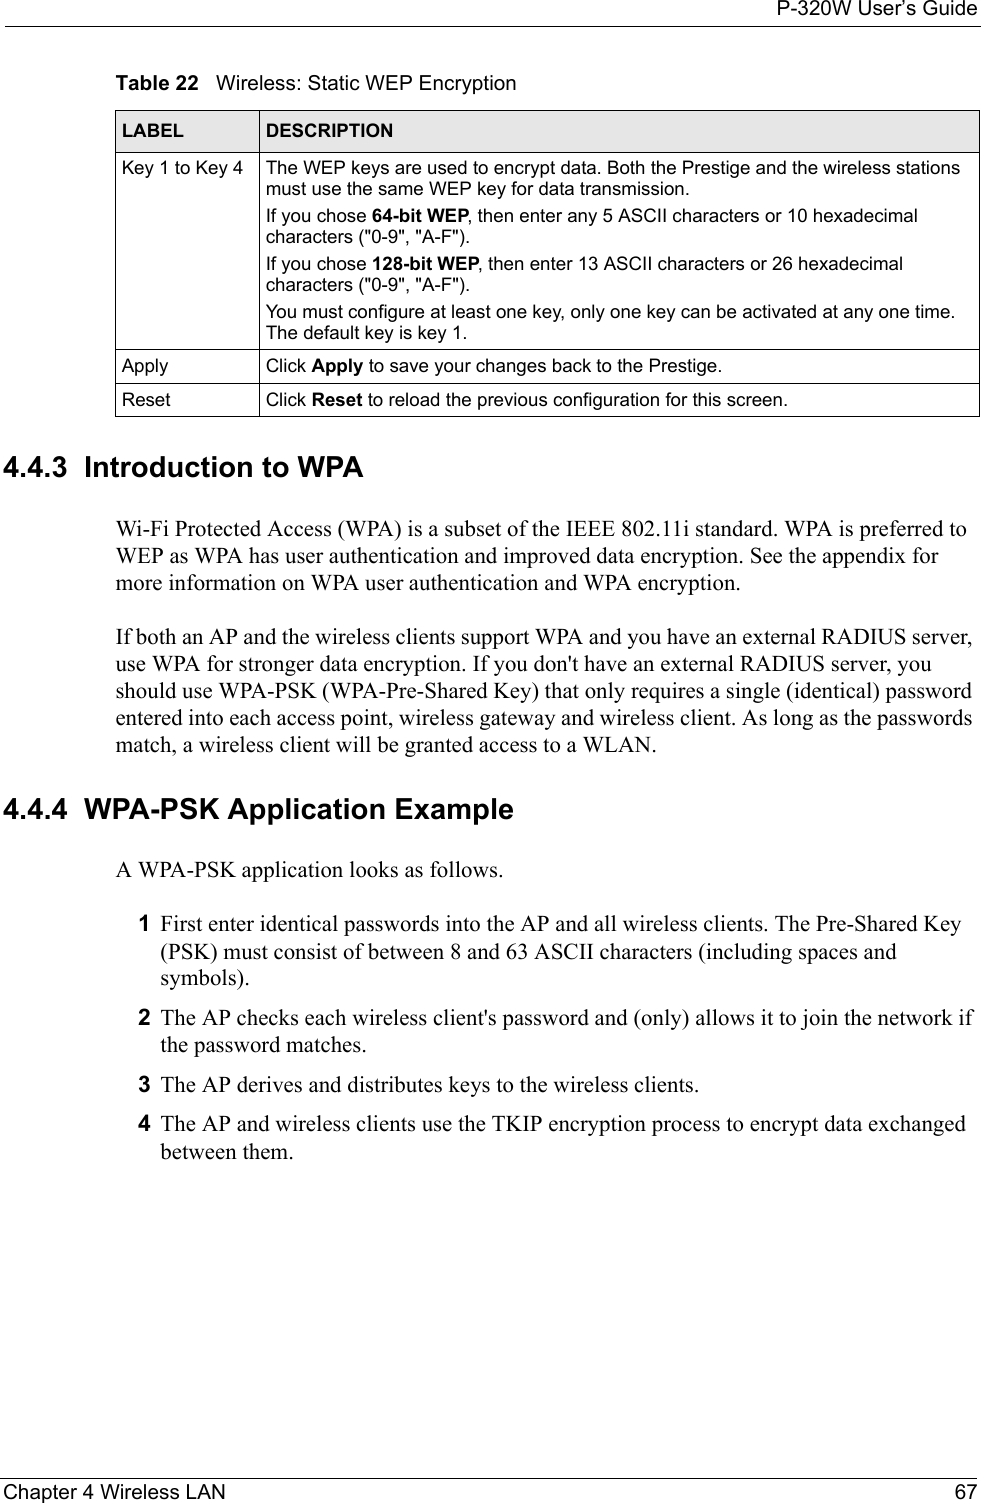 P-320W User’s GuideChapter 4 Wireless LAN 674.4.3  Introduction to WPA Wi-Fi Protected Access (WPA) is a subset of the IEEE 802.11i standard. WPA is preferred to WEP as WPA has user authentication and improved data encryption. See the appendix for more information on WPA user authentication and WPA encryption.If both an AP and the wireless clients support WPA and you have an external RADIUS server, use WPA for stronger data encryption. If you don&apos;t have an external RADIUS server, you should use WPA-PSK (WPA-Pre-Shared Key) that only requires a single (identical) password entered into each access point, wireless gateway and wireless client. As long as the passwords match, a wireless client will be granted access to a WLAN. 4.4.4  WPA-PSK Application ExampleA WPA-PSK application looks as follows.1First enter identical passwords into the AP and all wireless clients. The Pre-Shared Key (PSK) must consist of between 8 and 63 ASCII characters (including spaces and symbols).2The AP checks each wireless client&apos;s password and (only) allows it to join the network if the password matches.3The AP derives and distributes keys to the wireless clients.4The AP and wireless clients use the TKIP encryption process to encrypt data exchanged between them.Key 1 to Key 4 The WEP keys are used to encrypt data. Both the Prestige and the wireless stations must use the same WEP key for data transmission.If you chose 64-bit WEP, then enter any 5 ASCII characters or 10 hexadecimal characters (&quot;0-9&quot;, &quot;A-F&quot;).If you chose 128-bit WEP, then enter 13 ASCII characters or 26 hexadecimal characters (&quot;0-9&quot;, &quot;A-F&quot;). You must configure at least one key, only one key can be activated at any one time. The default key is key 1.Apply Click Apply to save your changes back to the Prestige.Reset Click Reset to reload the previous configuration for this screen.Table 22   Wireless: Static WEP EncryptionLABEL DESCRIPTION